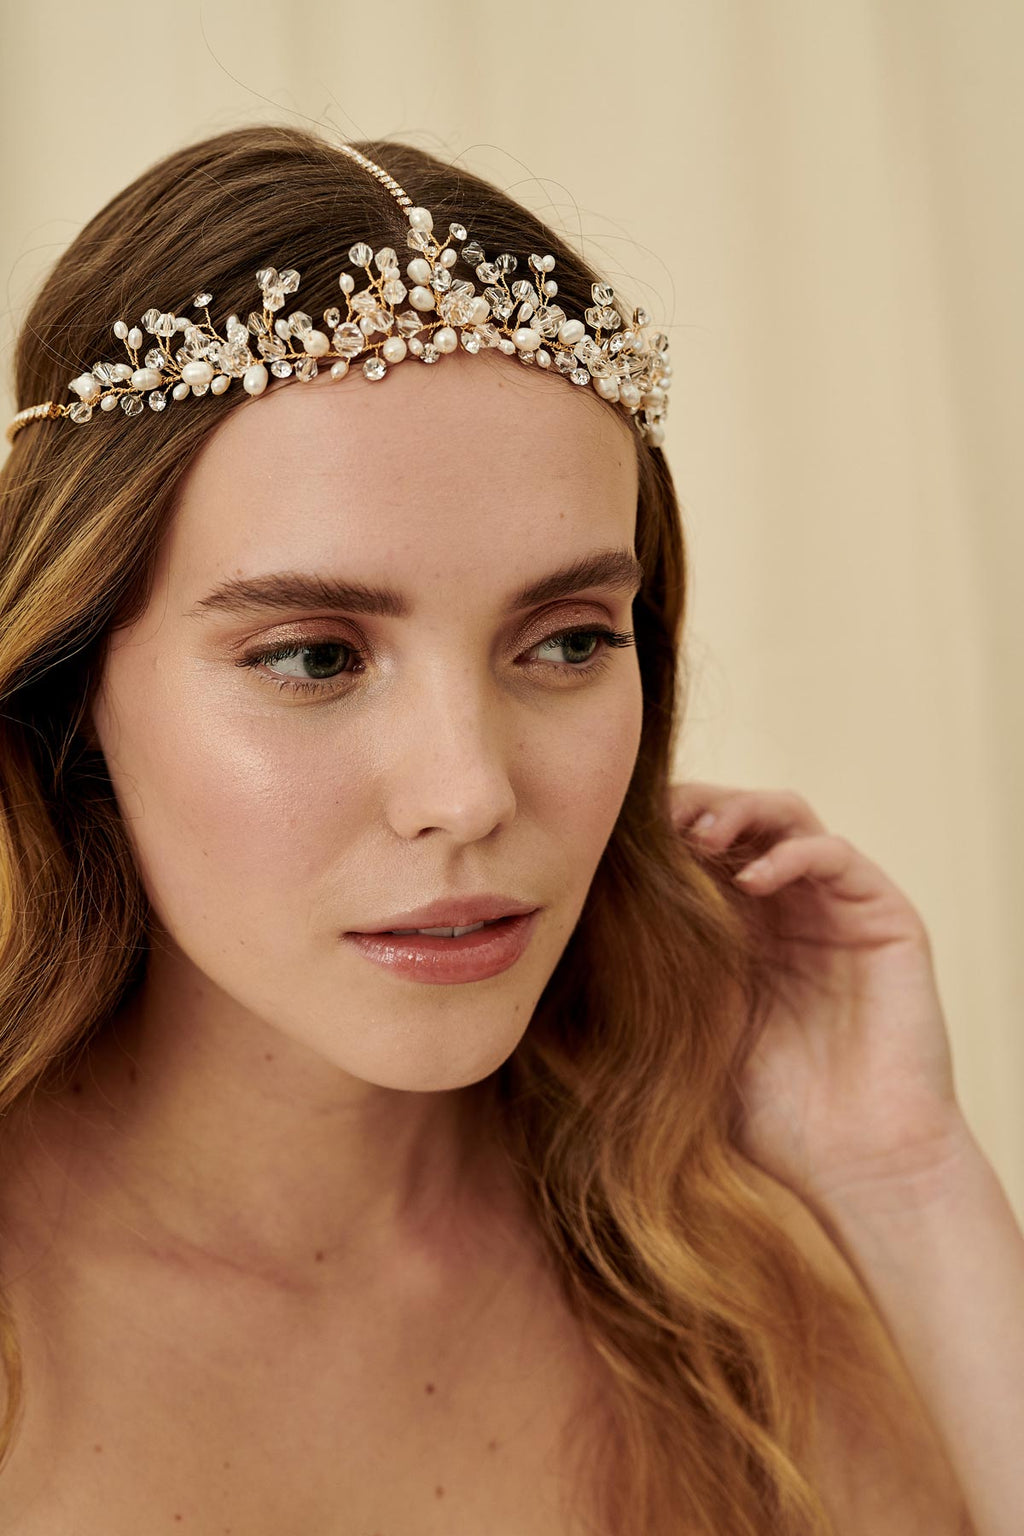 A vintage-inspired three strand bridal headpiece made with pearls and Swarovski crystals